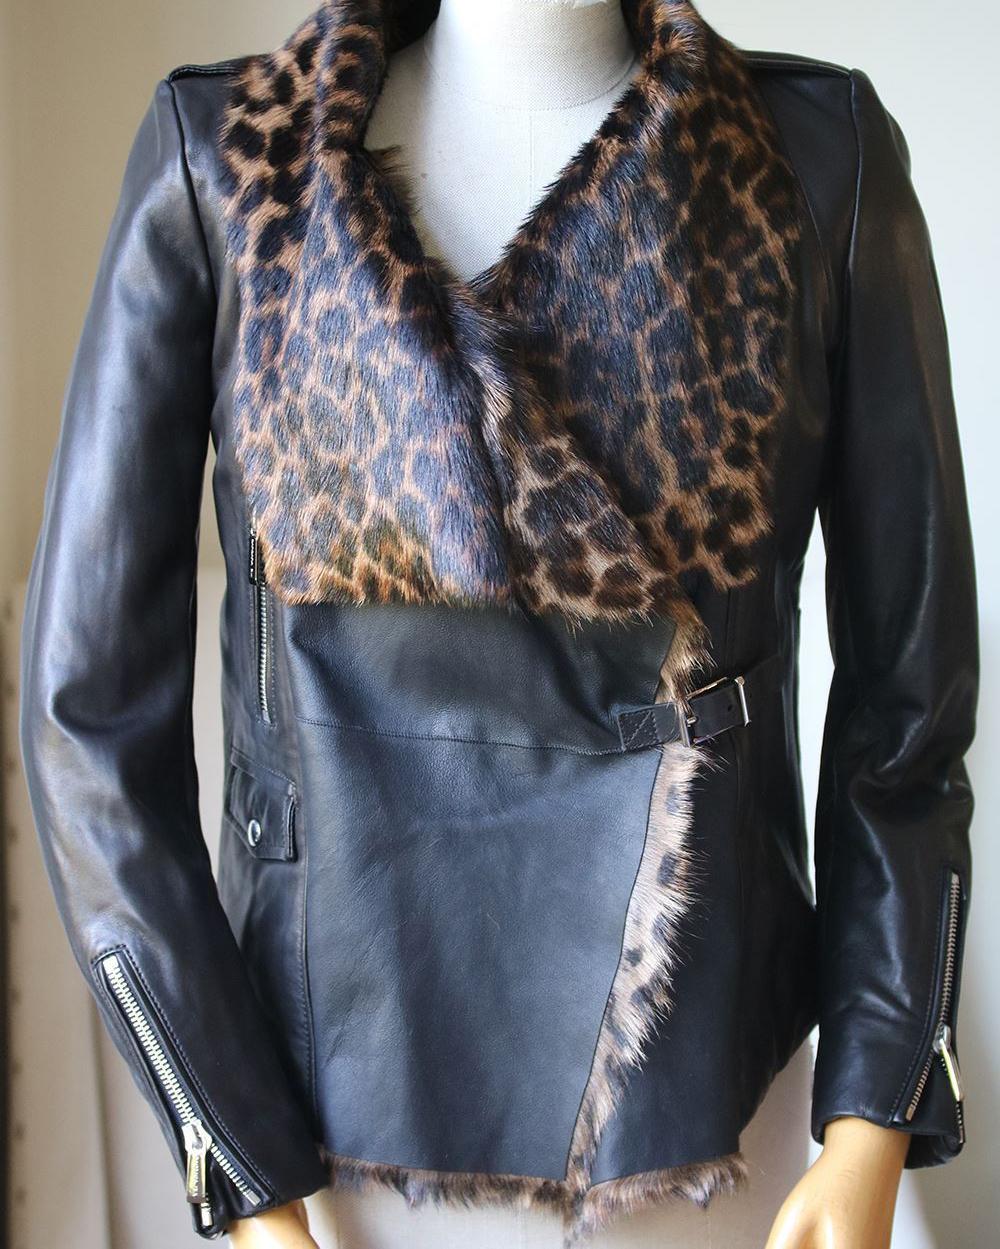 Black goatskin and lambskin leopard-print fur jacket from Barbara Bui. Leopard-print shearling fur. Belted fastening at the side. 100% Lambskin. Lining: 100% goat skin shearling. Colour: black. 

Size: FR 38 (UK 10, US 6, IT 42)

Condition: As new